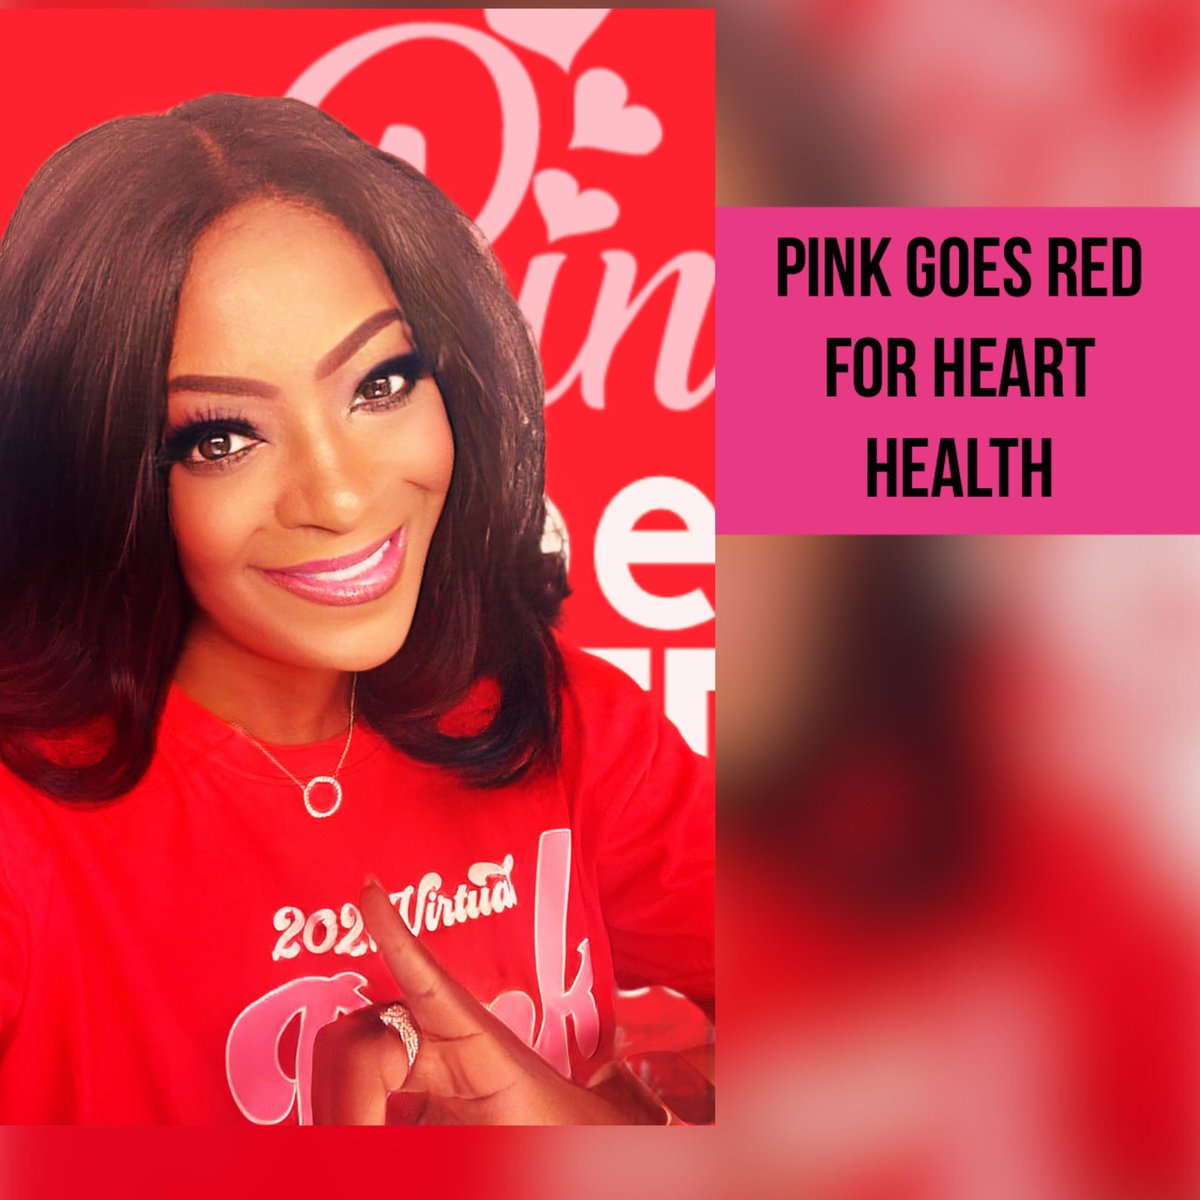 PINK goes RED for heart health. 💗❤️ #PinkGoesRed #heart #hearthealth #AKA #AKA1908 #Health #GoRed #GoRedforWomen #bhfyp